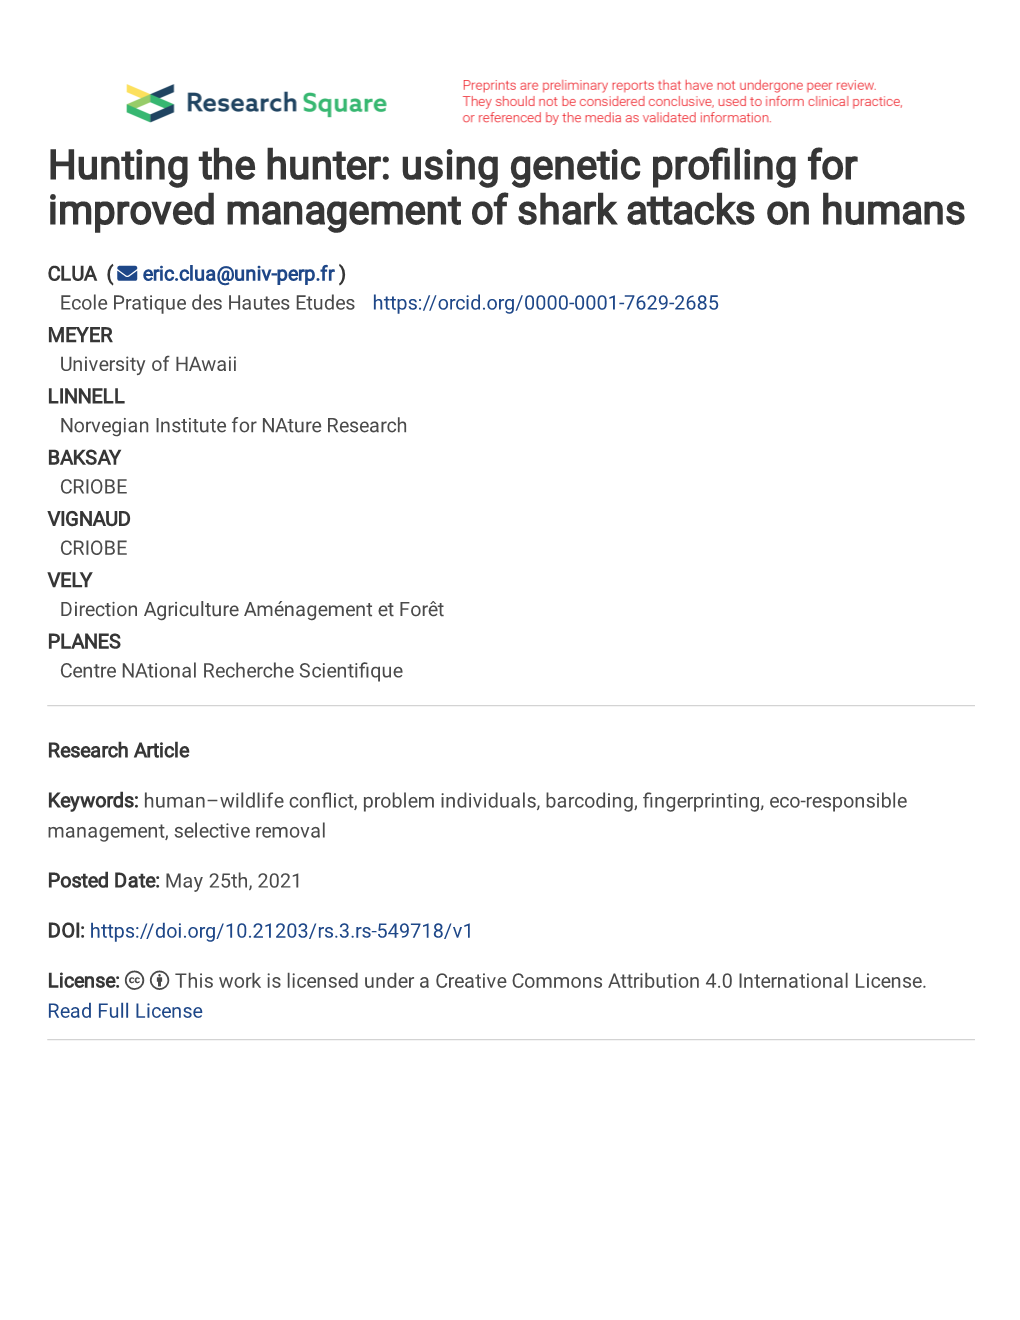 Using Genetic Pro Ling for Improved Management of Shark Attacks on Humans